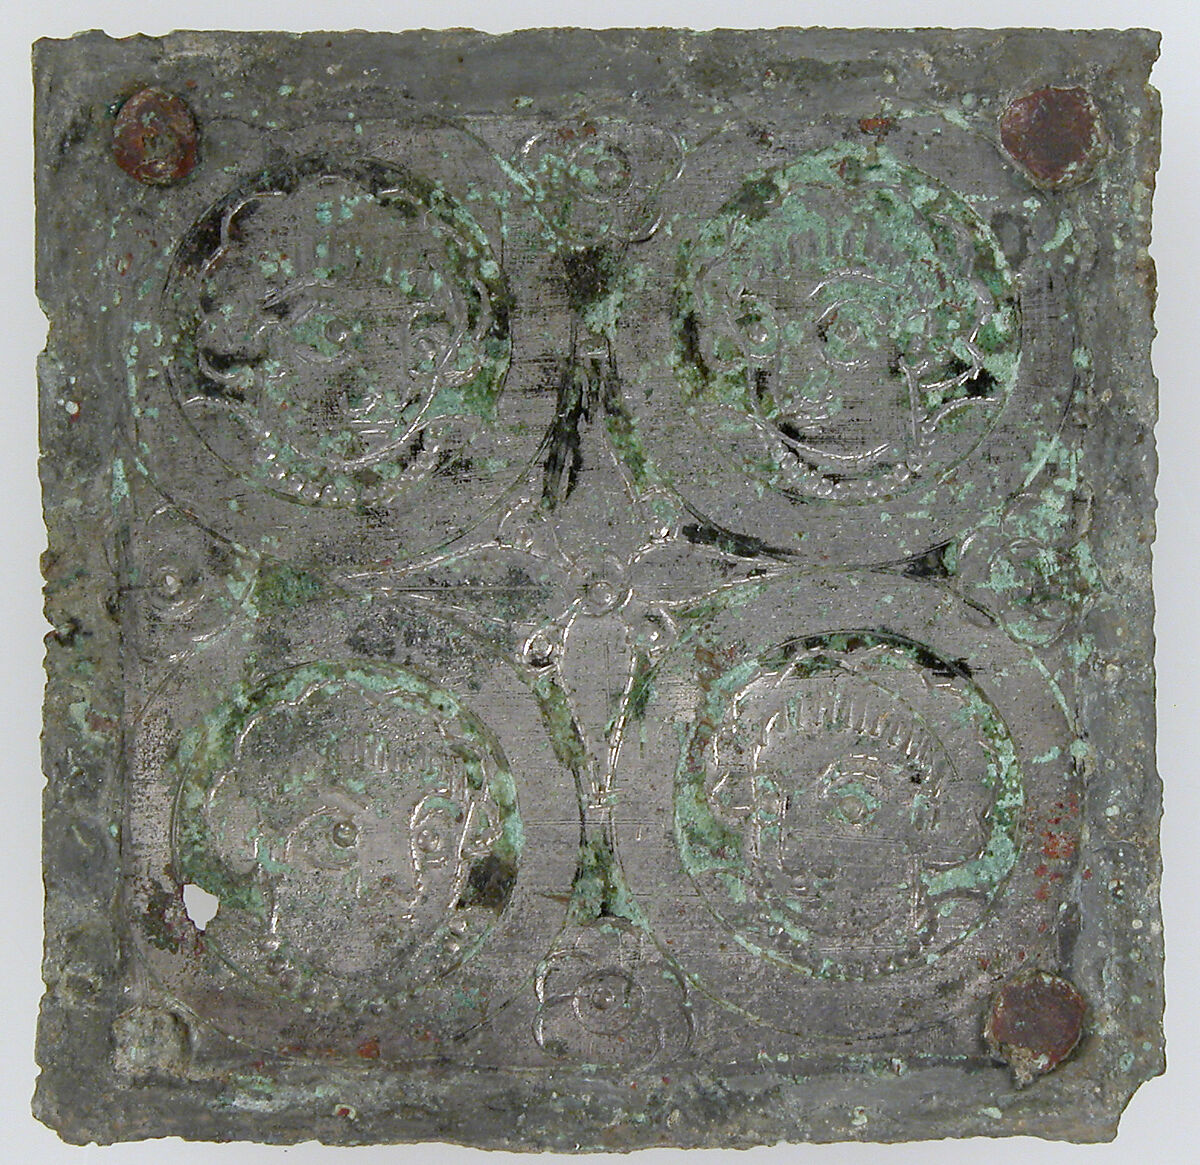 Tinned-Copper Plaque with a Personification, Tinned copper, Byzantine 